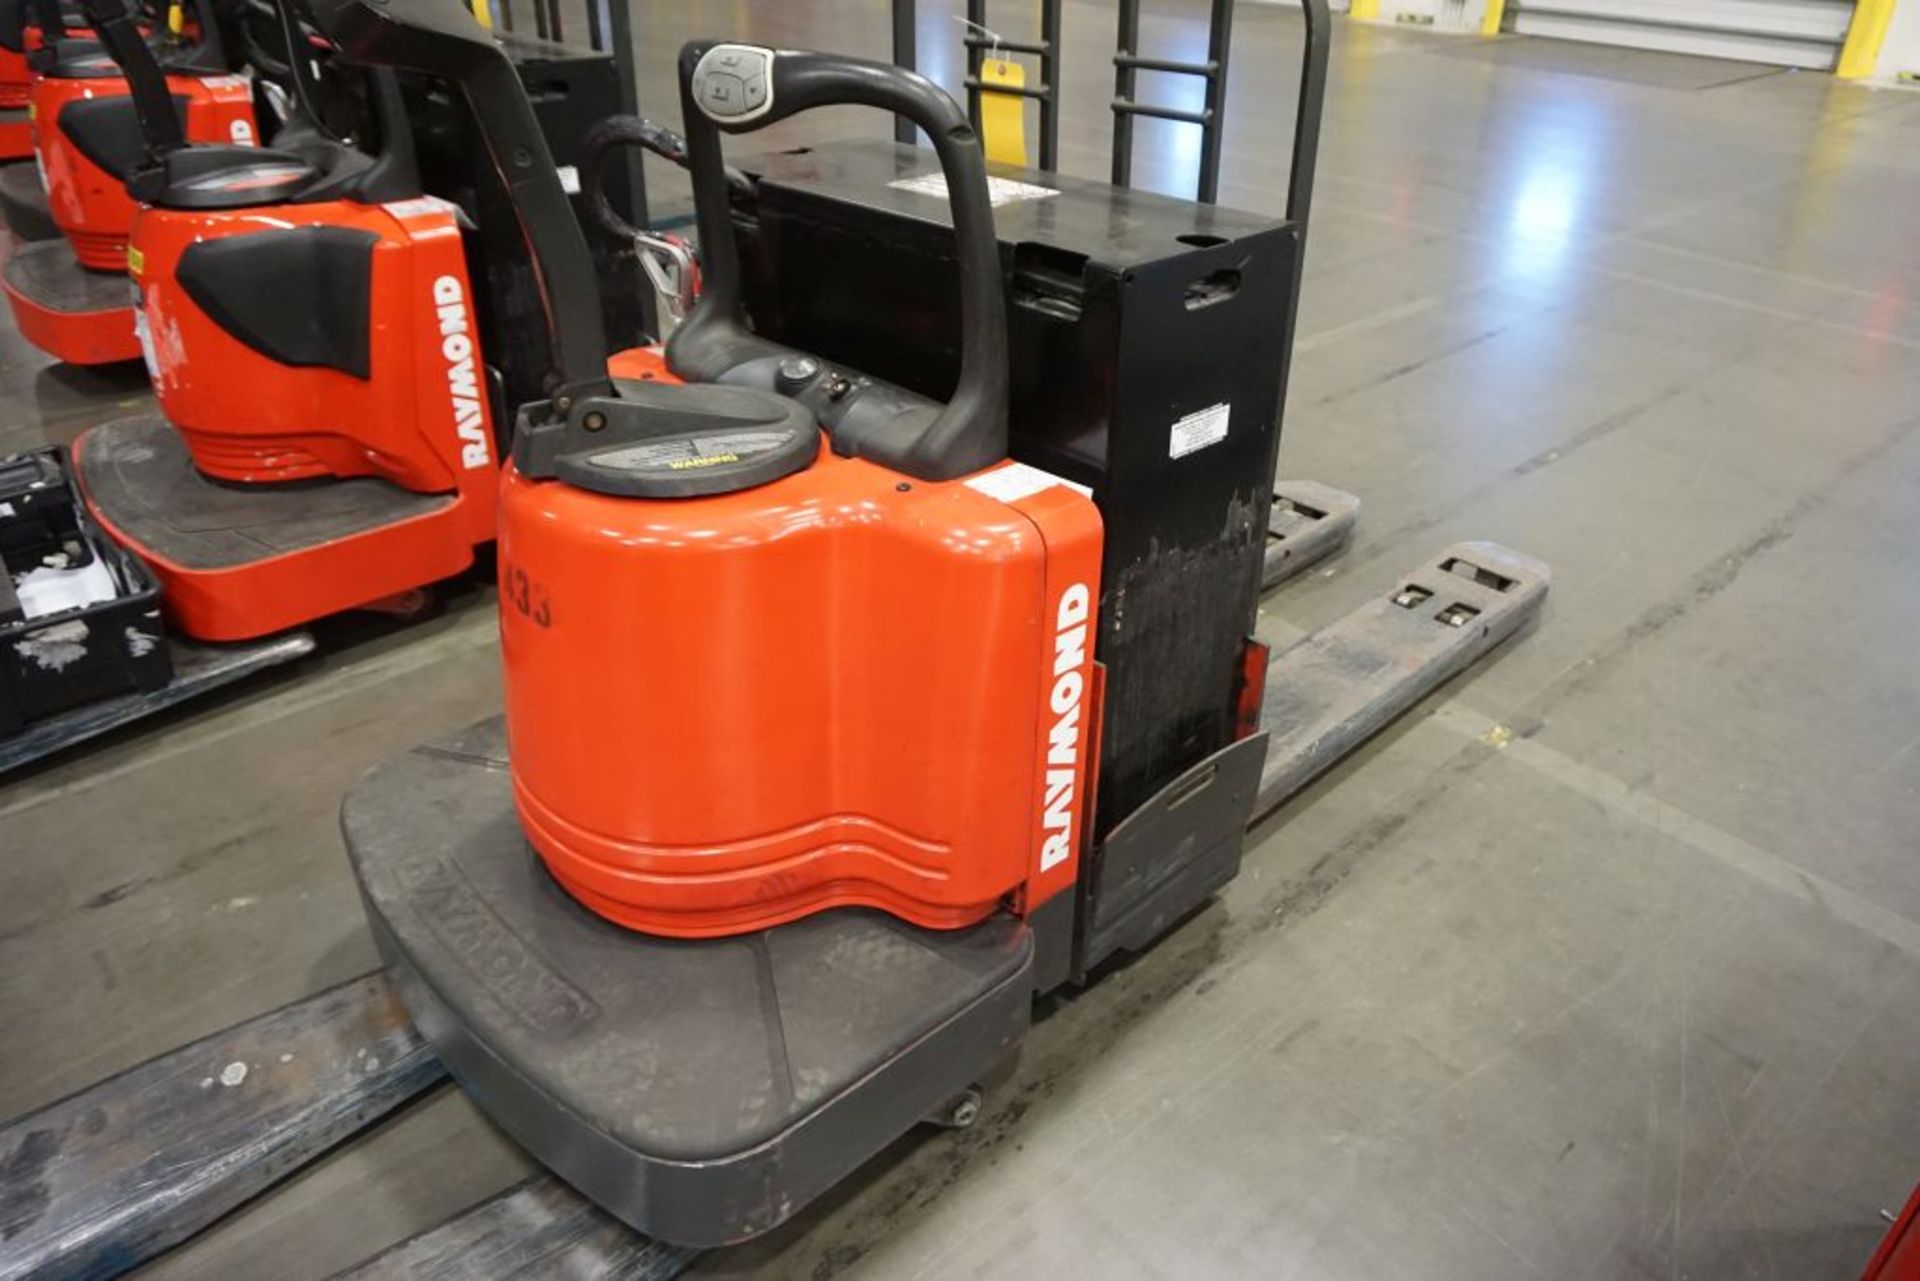 Raymond Walkie Rider Electric Pallet Truck - Model No. 112TM-FRE60L; Serial No. 112-03-45198; 6,